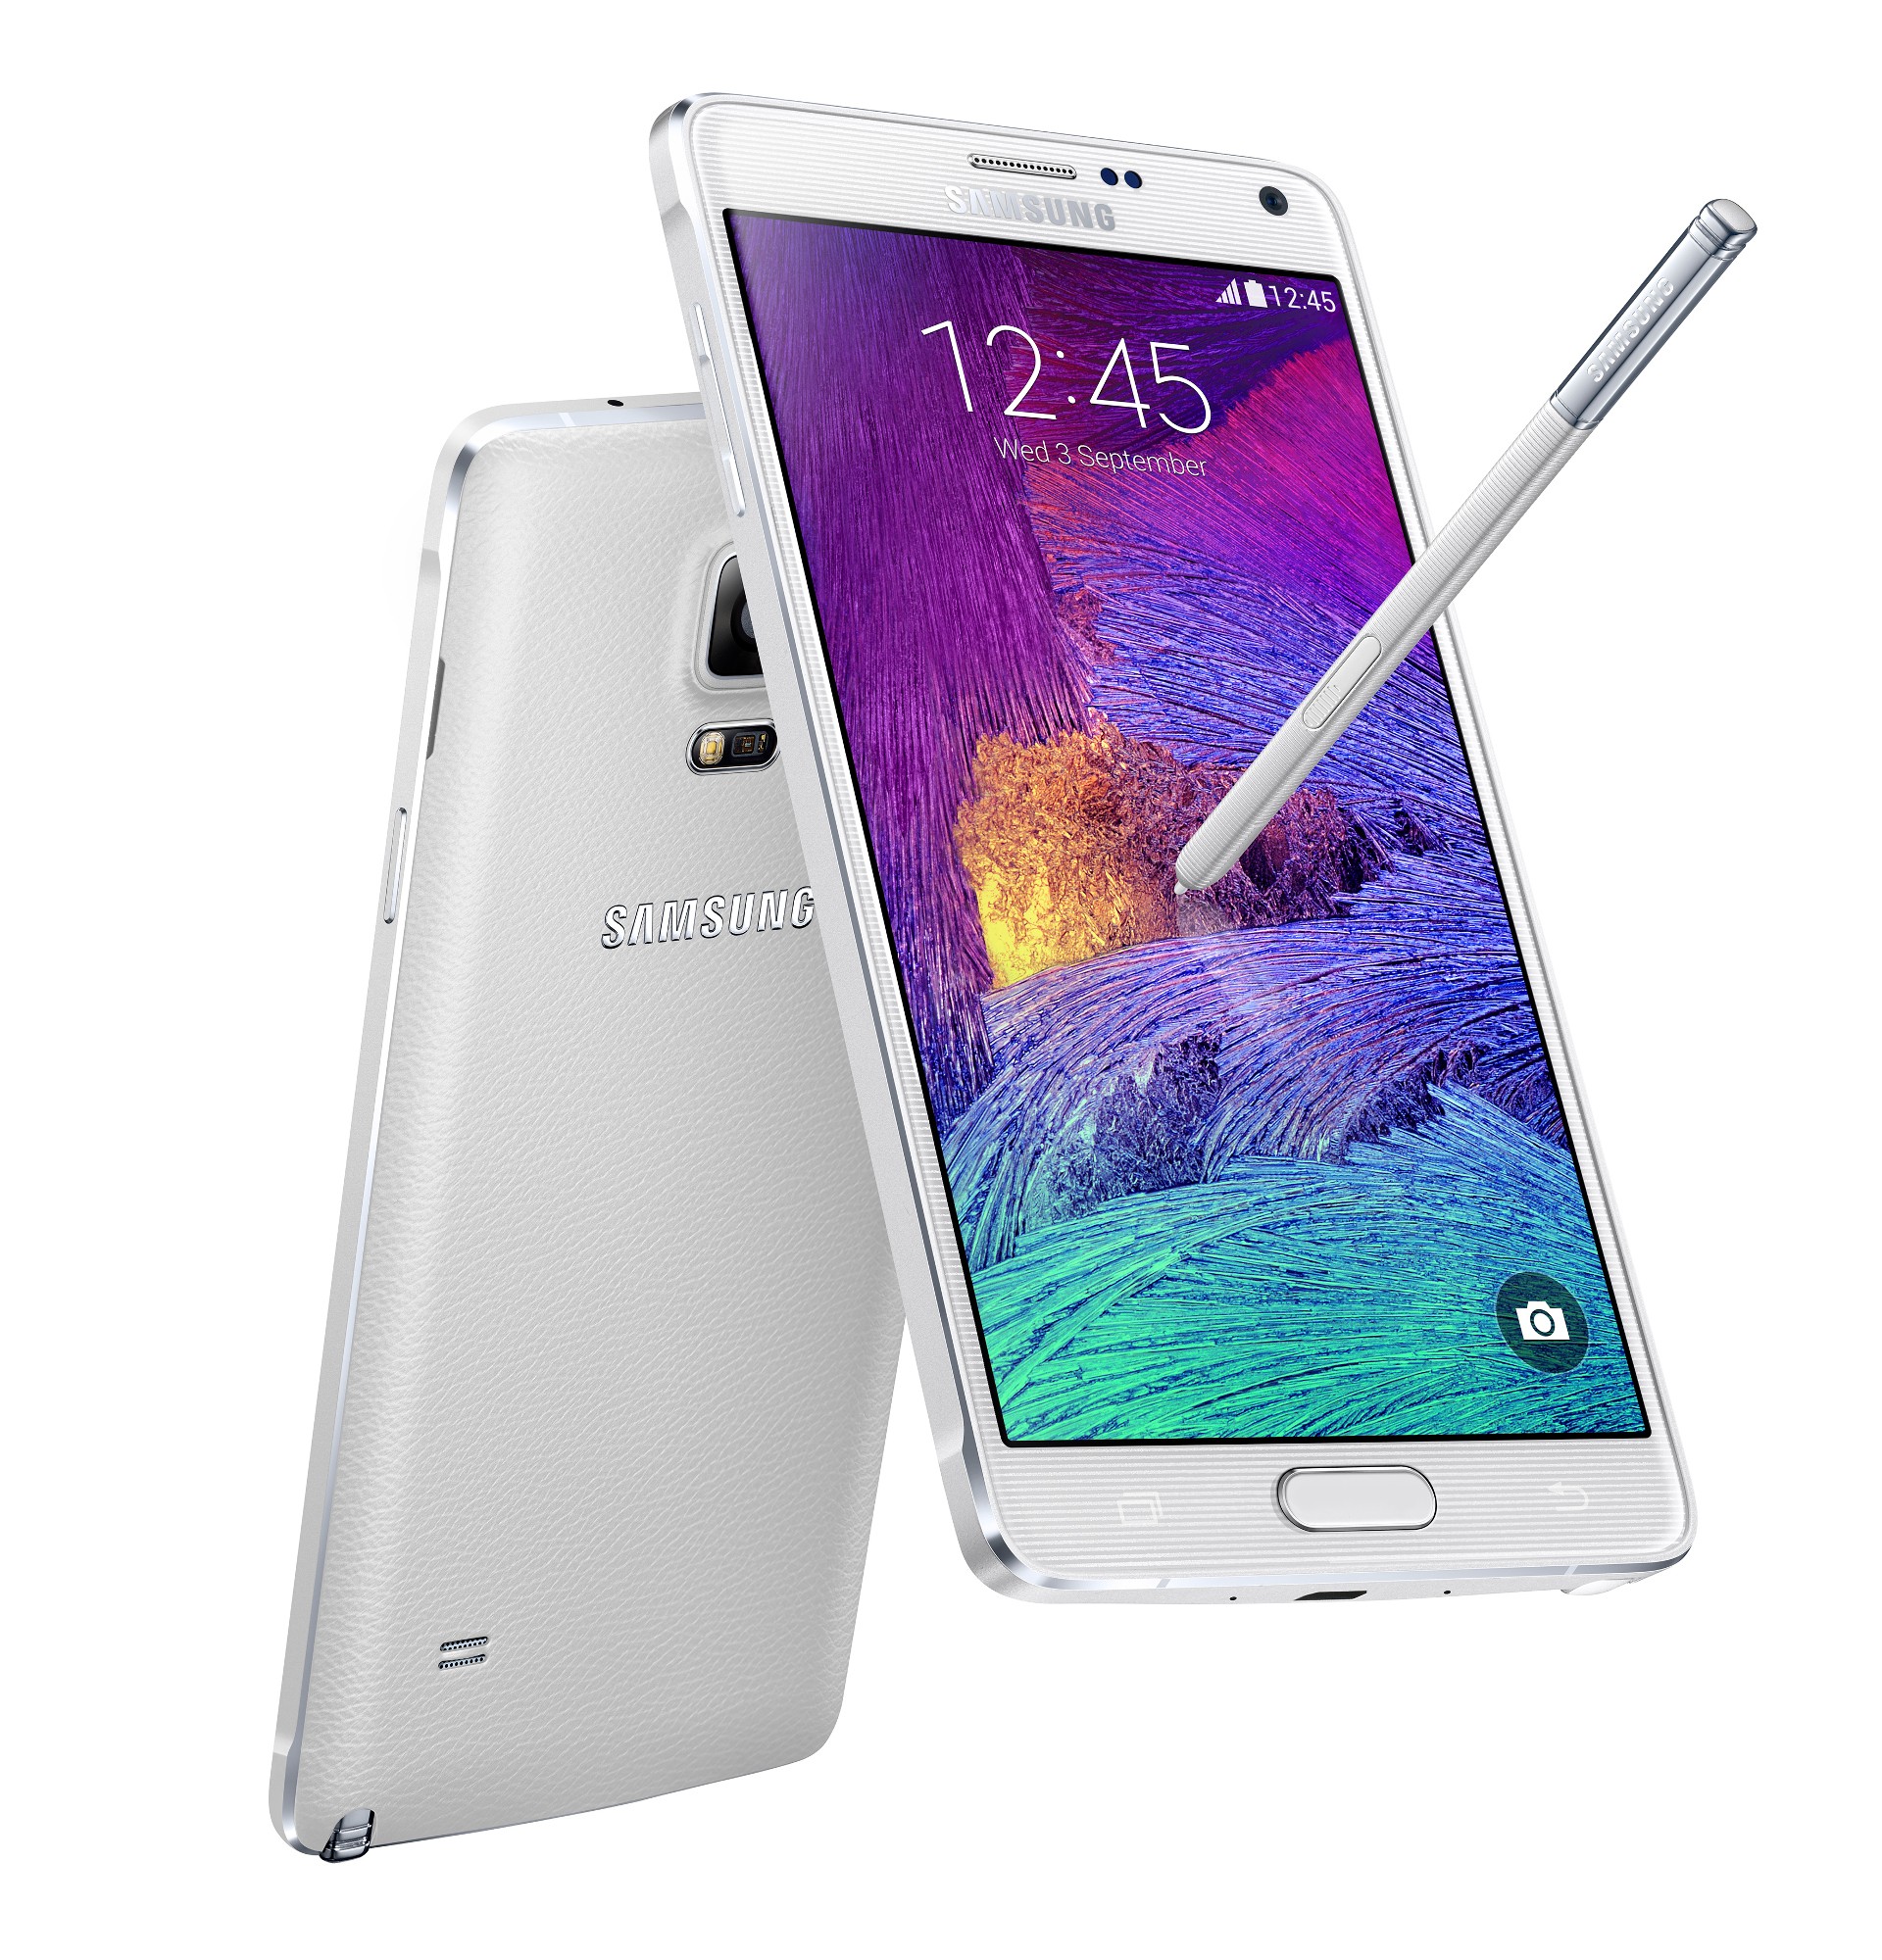 Samsung Galaxy Note 4 and Galaxy Note Edge Unleashed at IFA 2014 457525 2 - TOP 10 : Smartphones of 2014